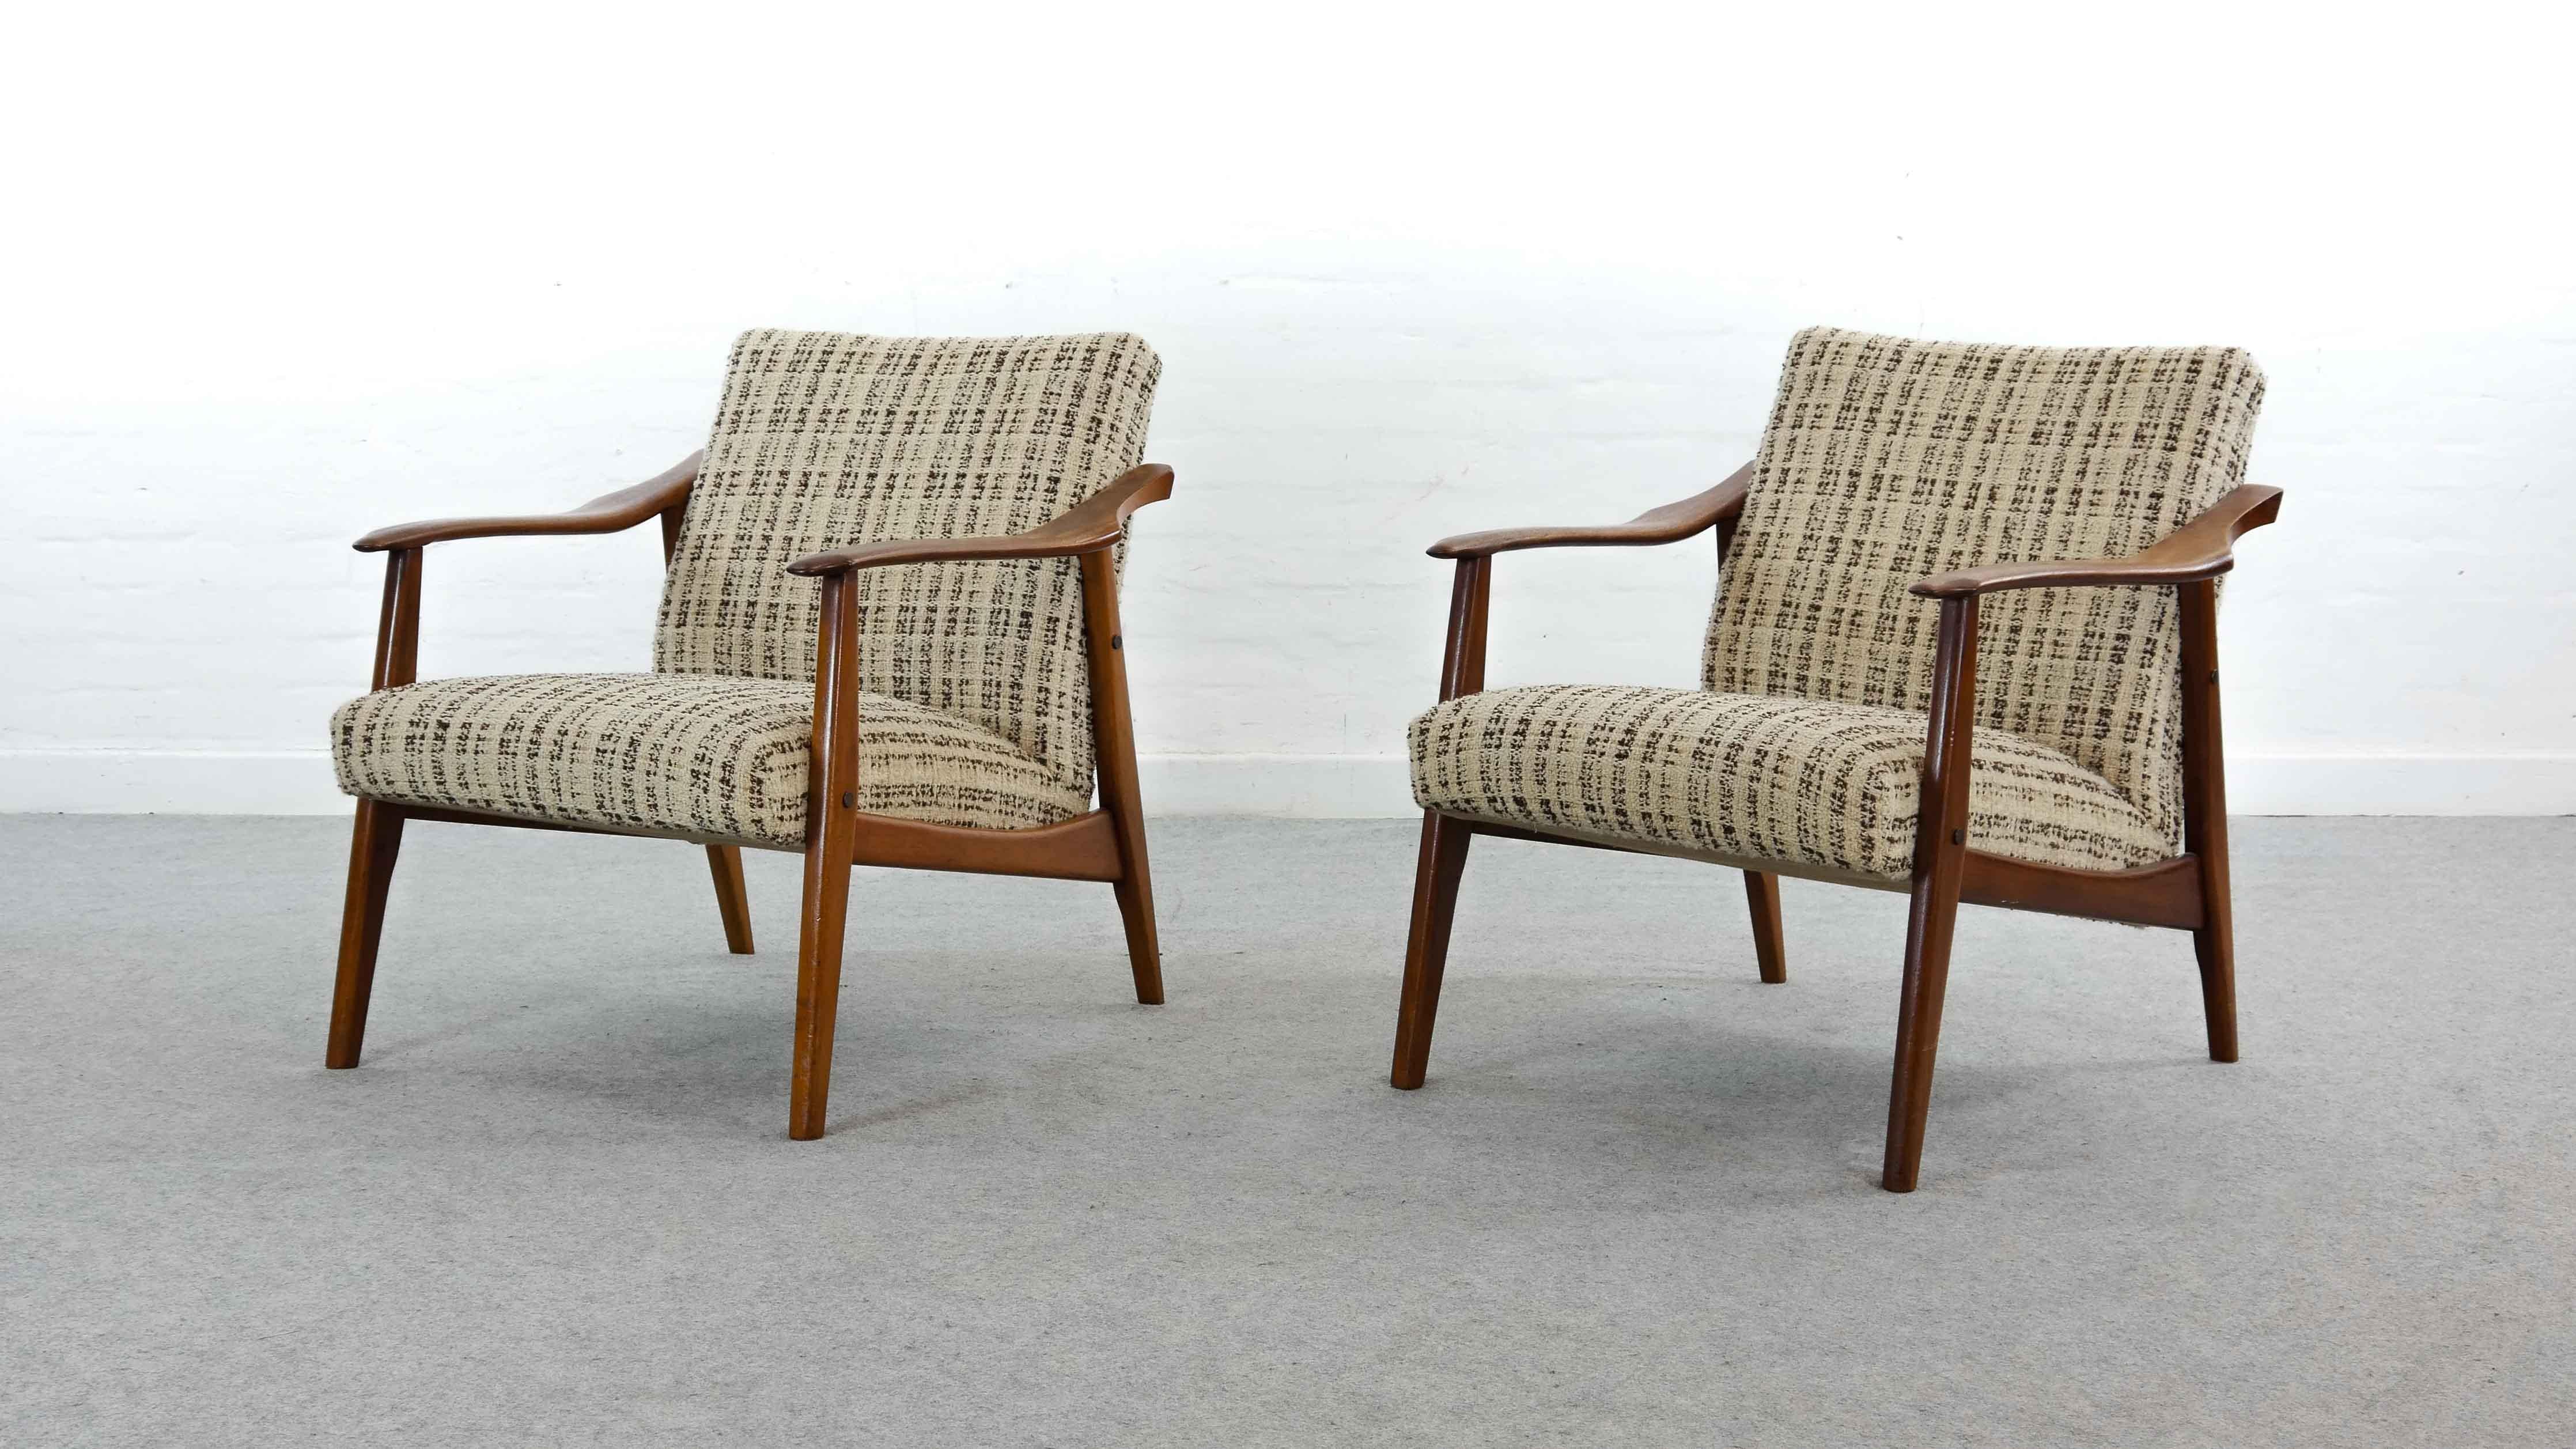 Pair of vintage Scandinavian armchairs from the 1960s, Mid-Century Modern teakwood. Armrests show sculptural and eccentric shape. Upholstered in original woolfabric. Designer and manufacturer unknown.